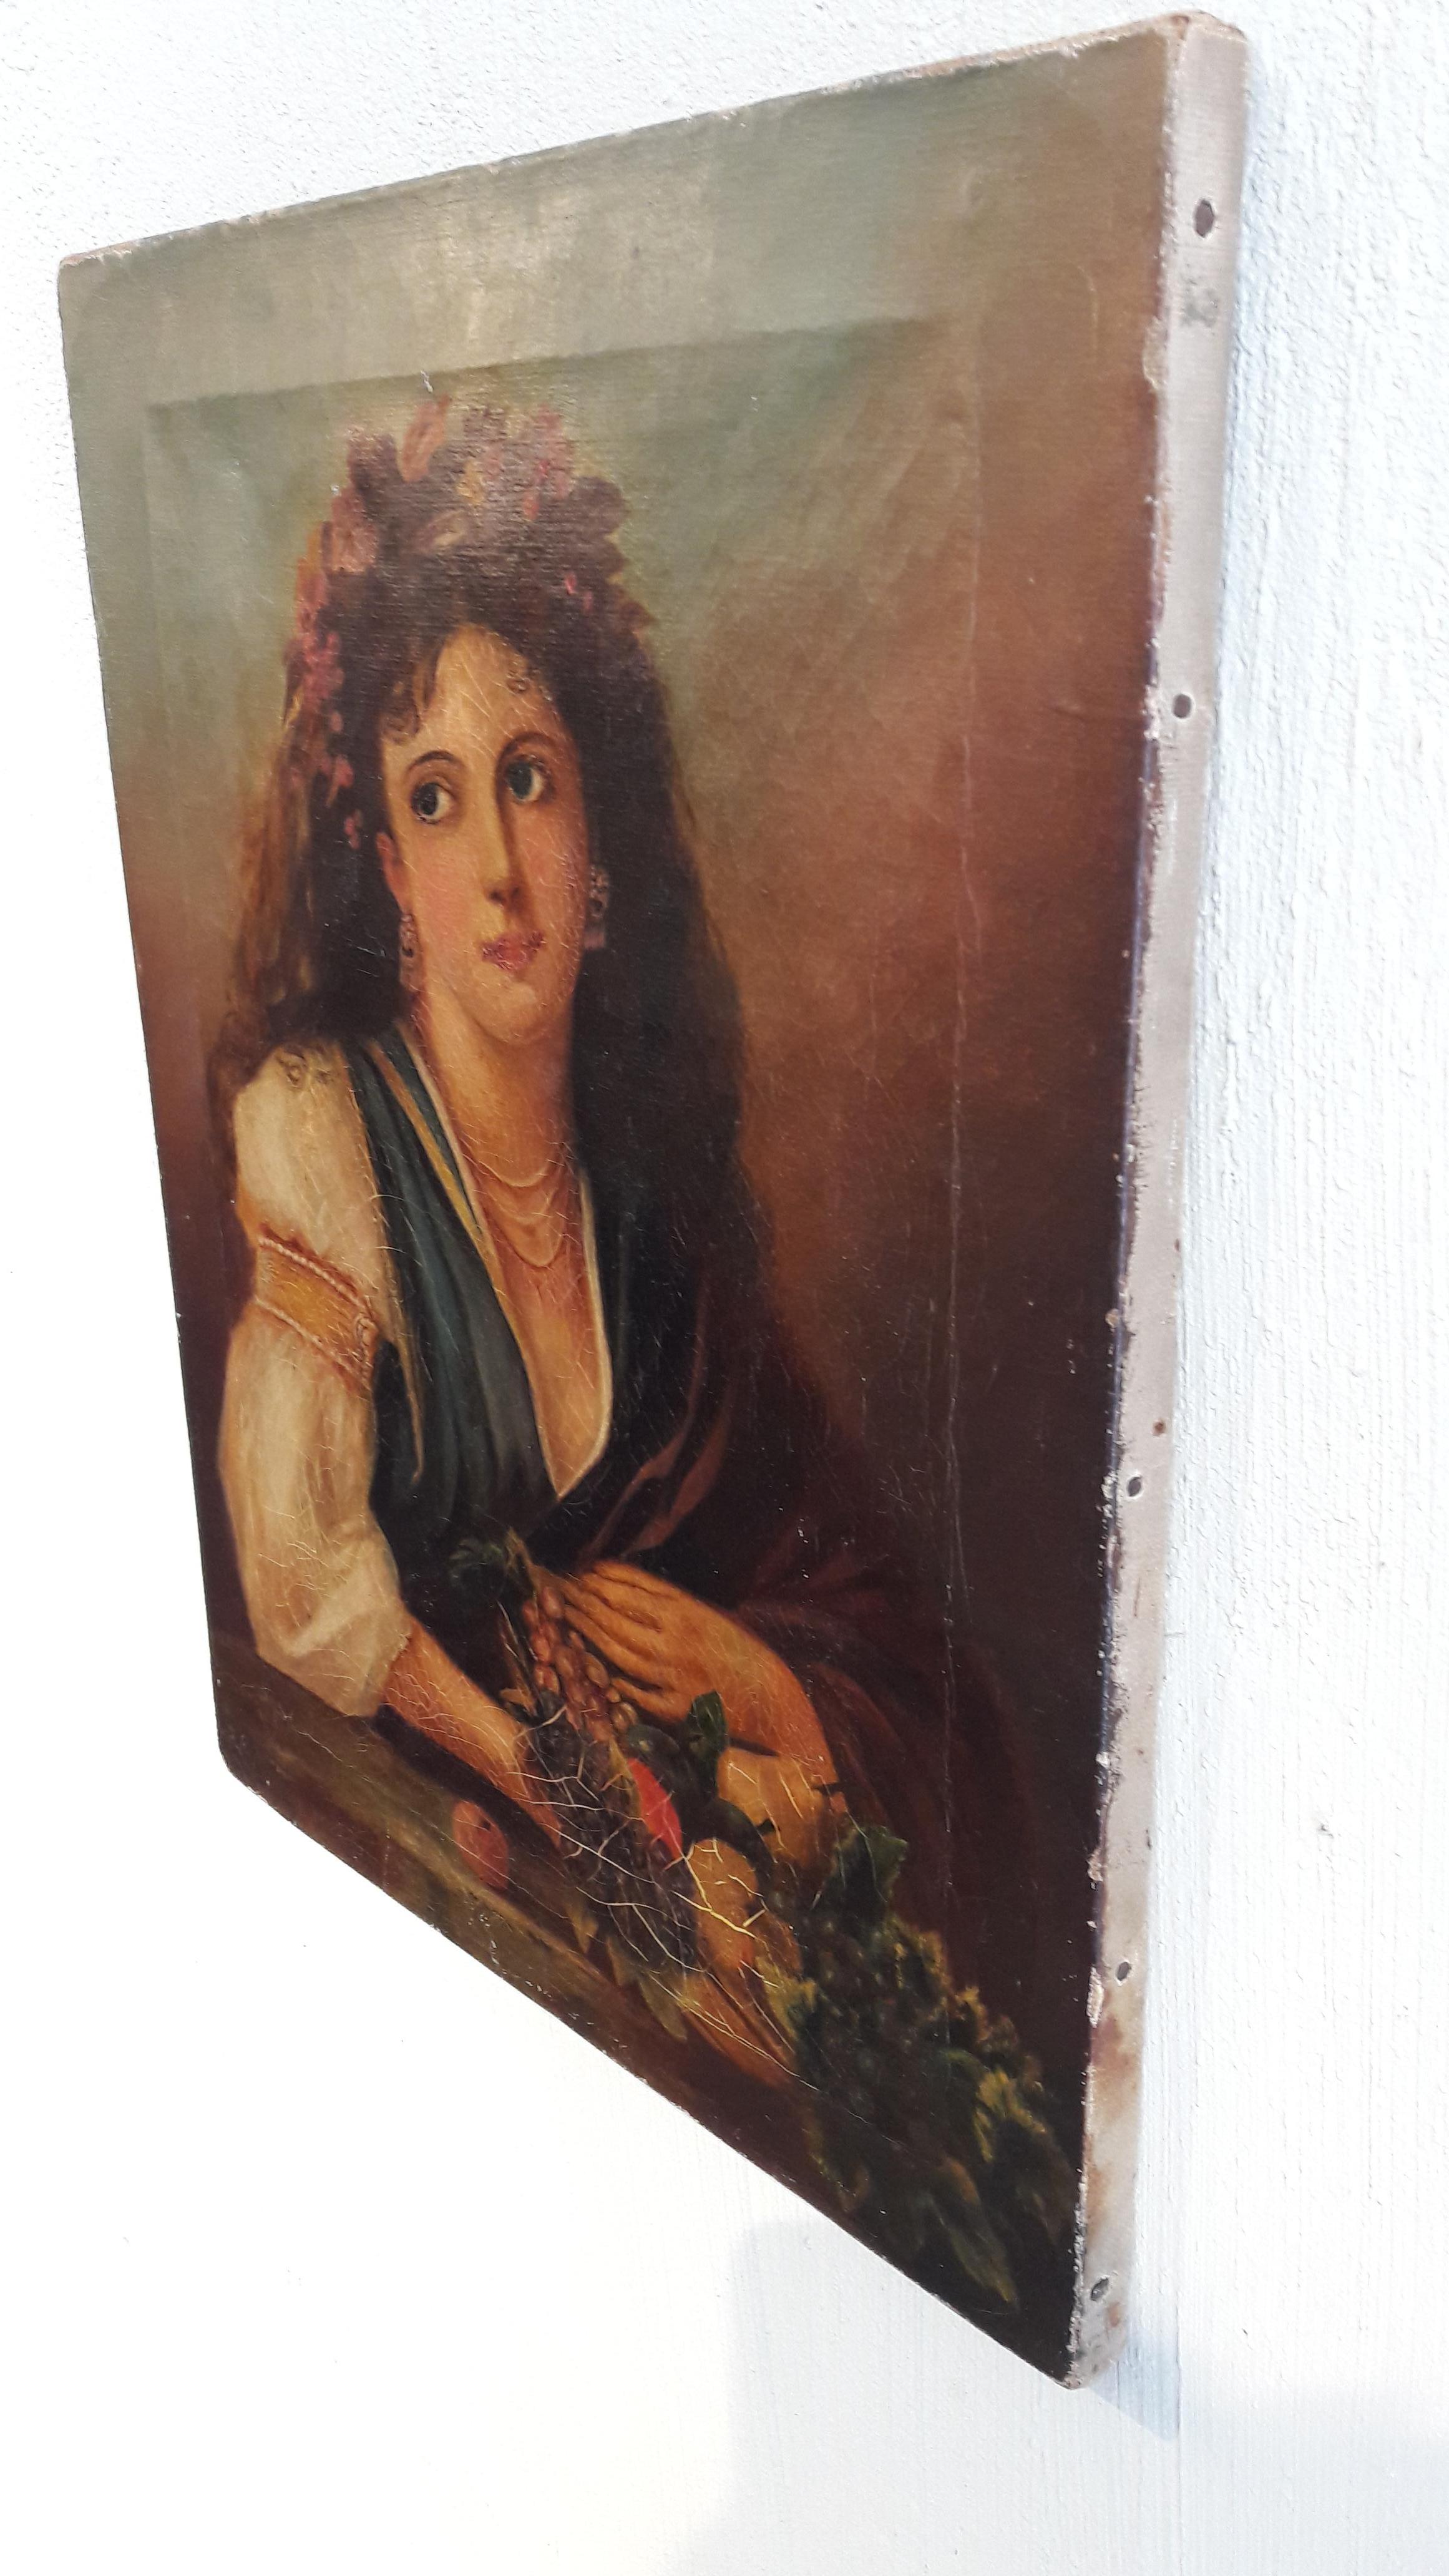 Smooth oil on canvas of a Mediterranean lady. There is a signature on the left corner: P. R?